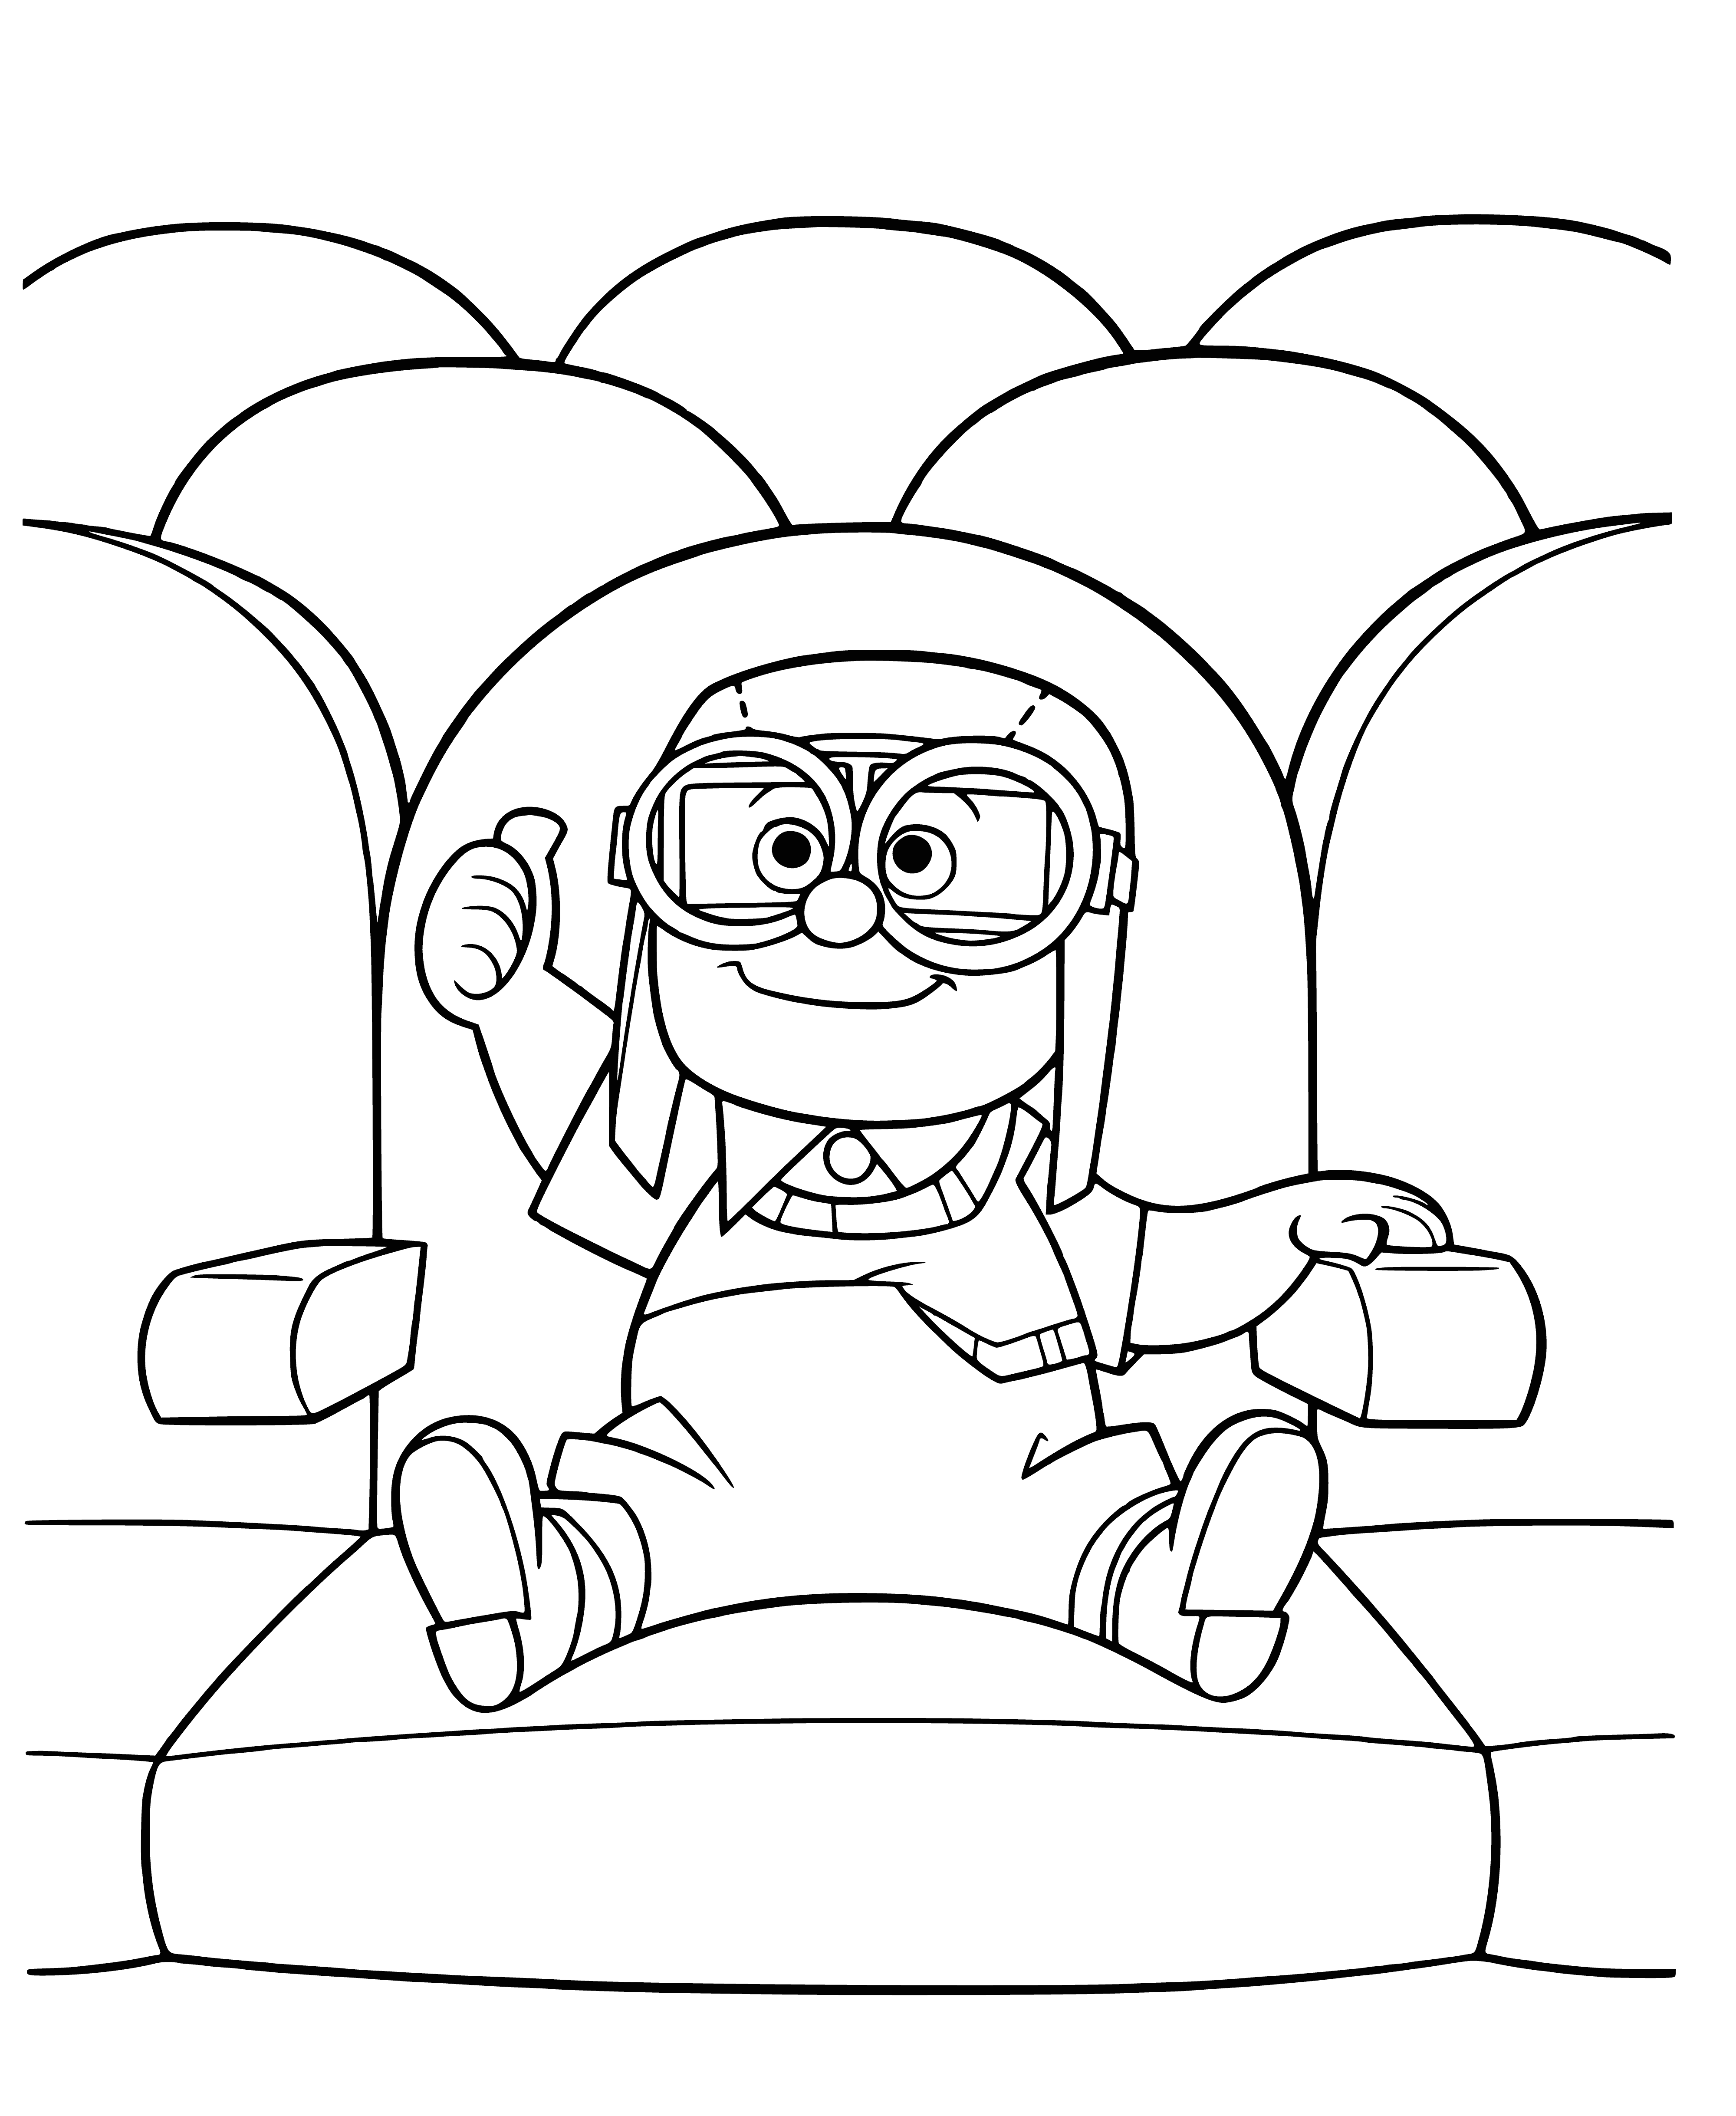 Little Karl coloring page